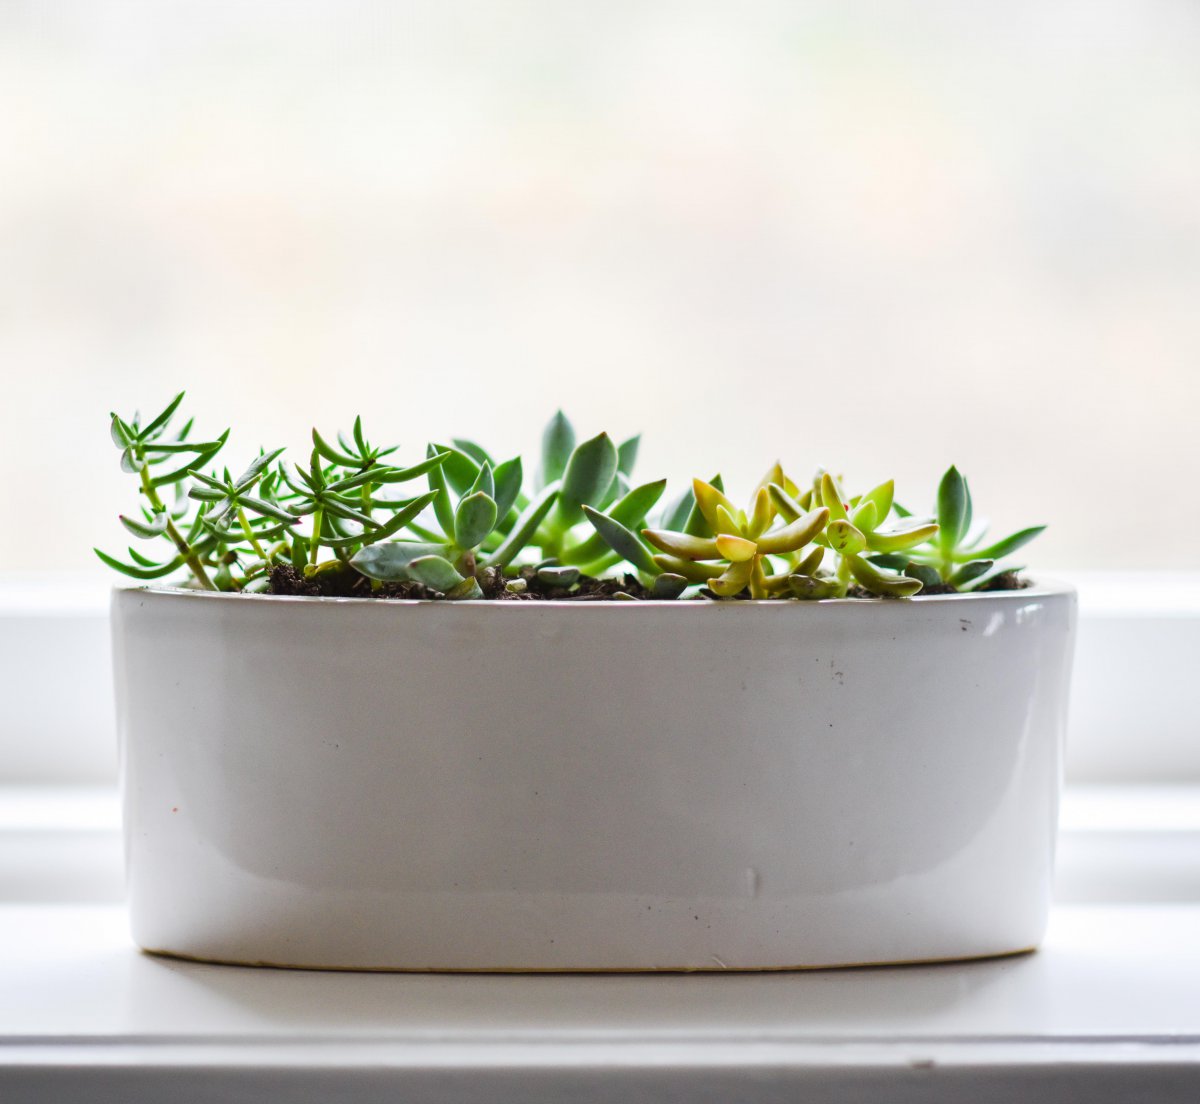 Pictures of plump and juicy succulent potted plants